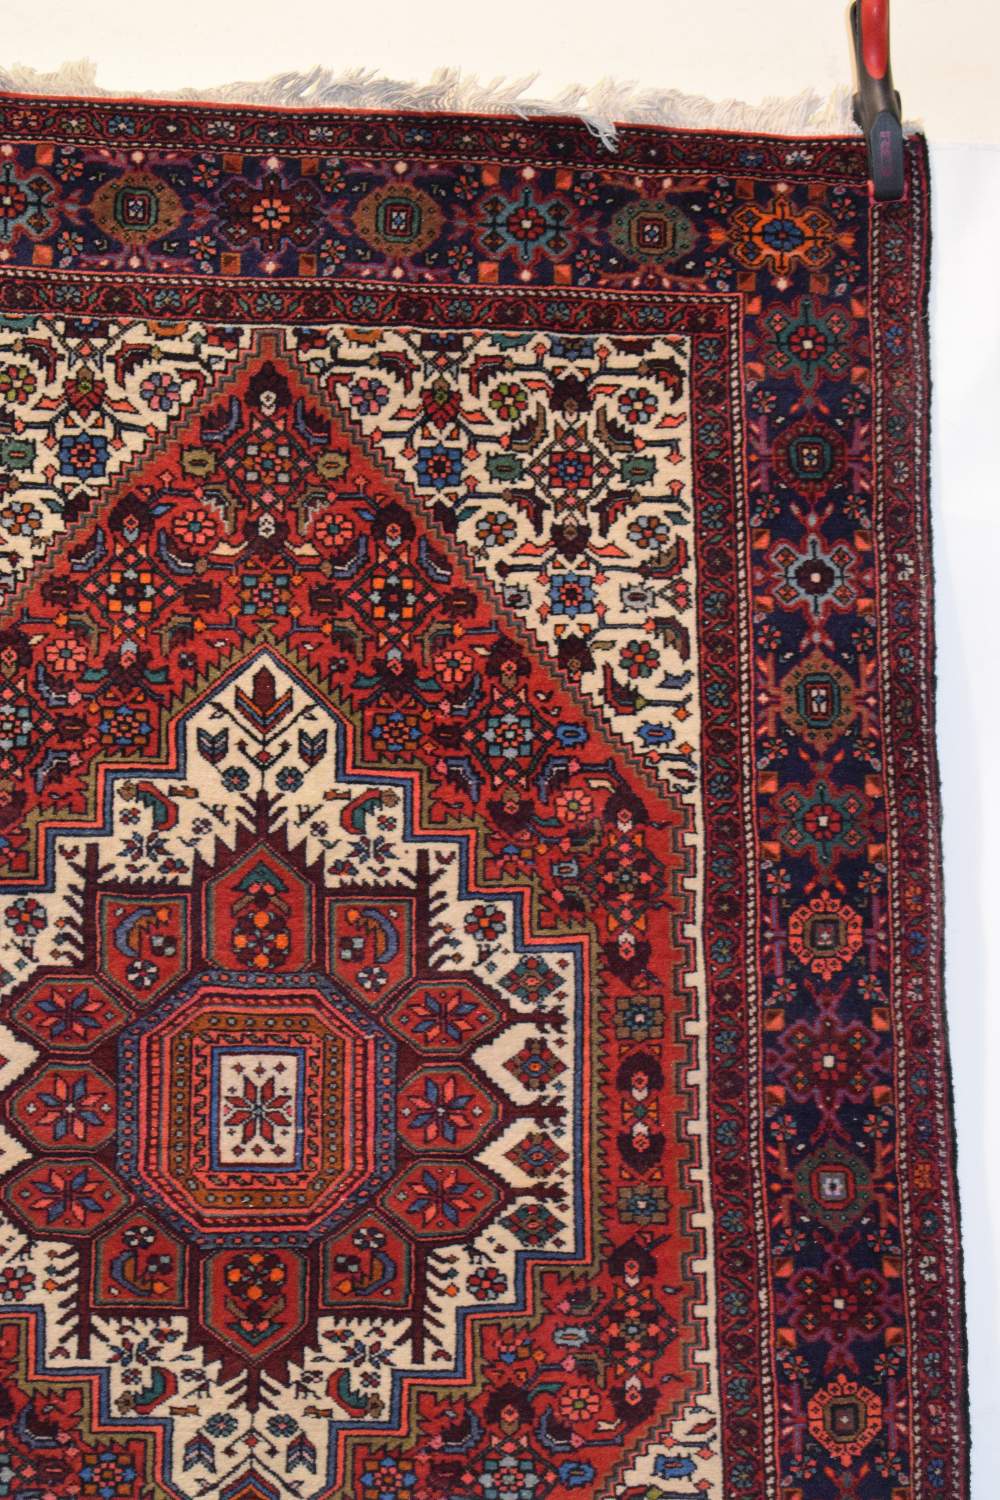 Bijar rug, north west Persia, second half 20th century, 4ft. 10in. X 3ft. 4in. 1.47m. X 1.02m. - Image 3 of 9